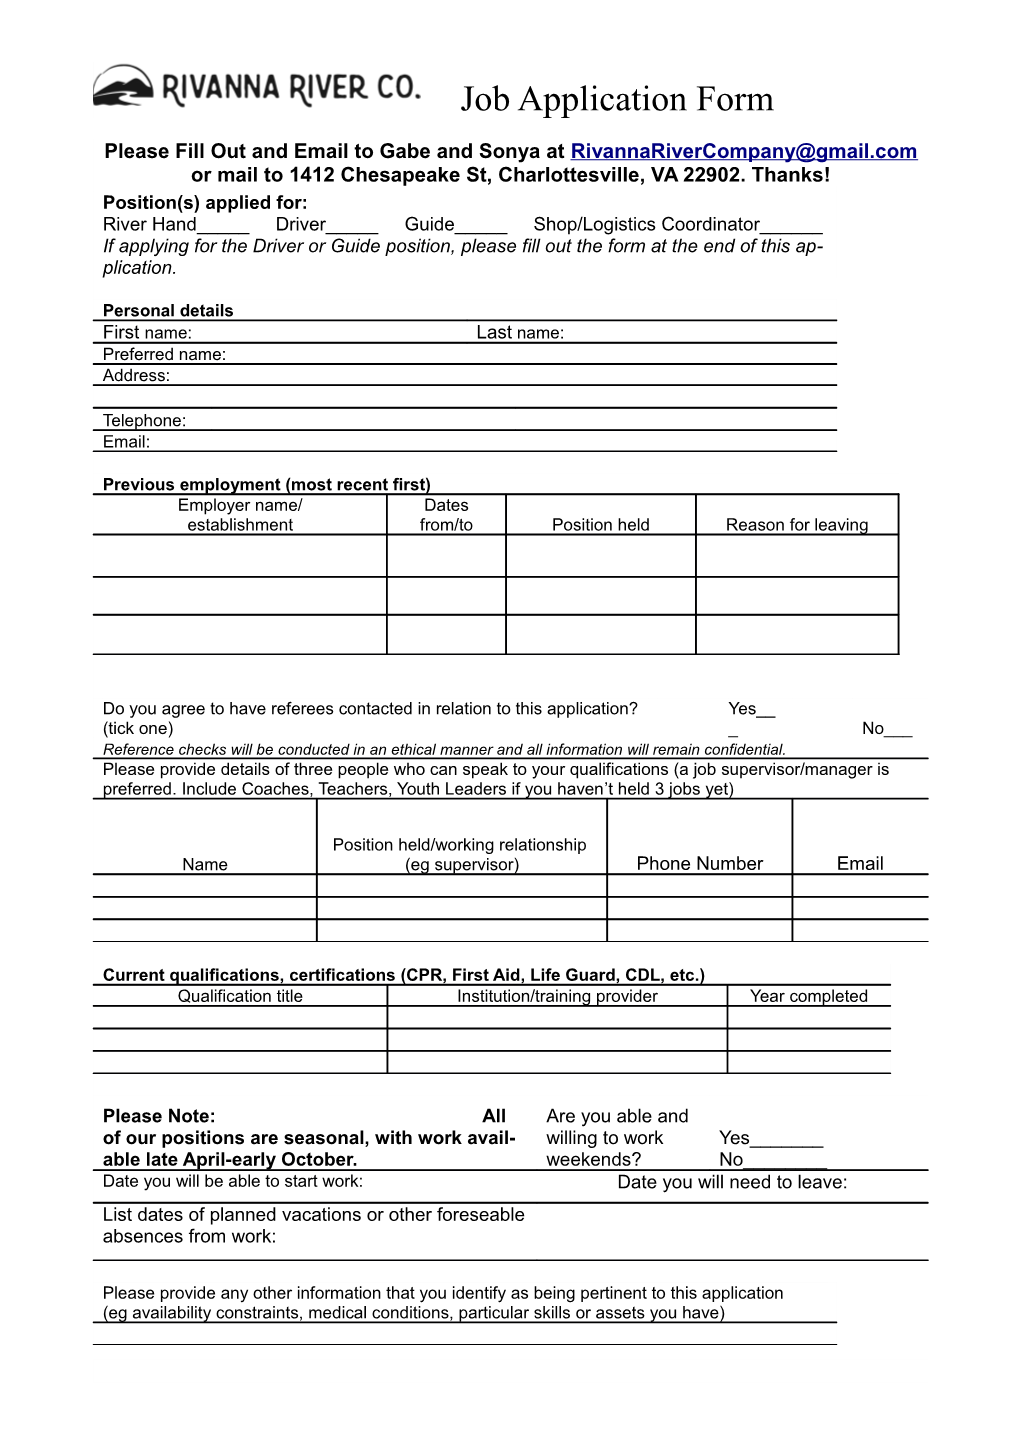 Please Fill out and Email to Gabe and Sonya at Or Mail to 1412 Chesapeake St, Charlottesville